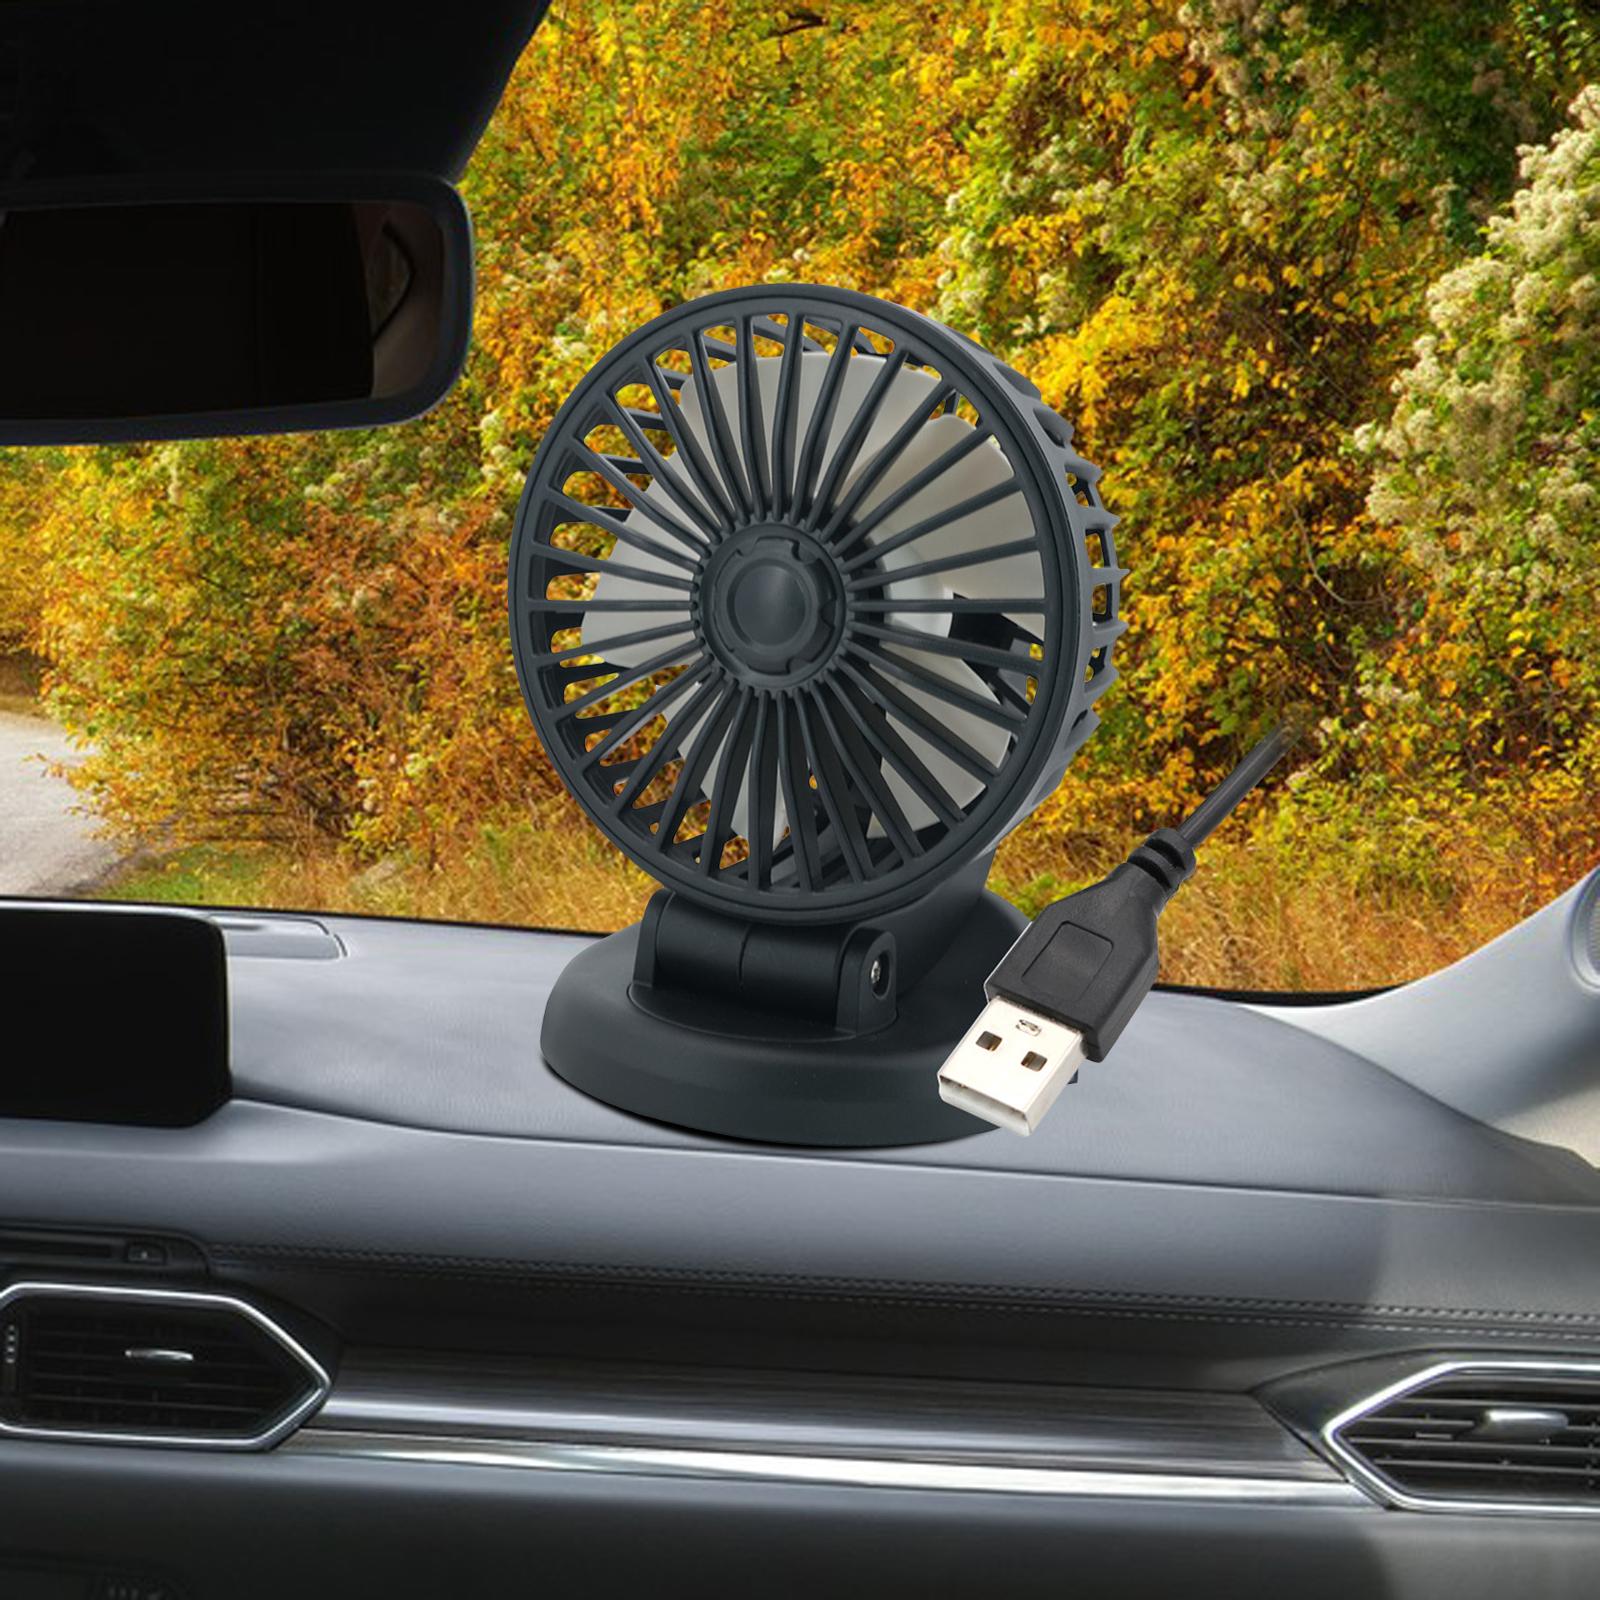 Car Cooling Fan, Air Circulation Fan Auto Cooler Fan for SUV Boat 5V USB